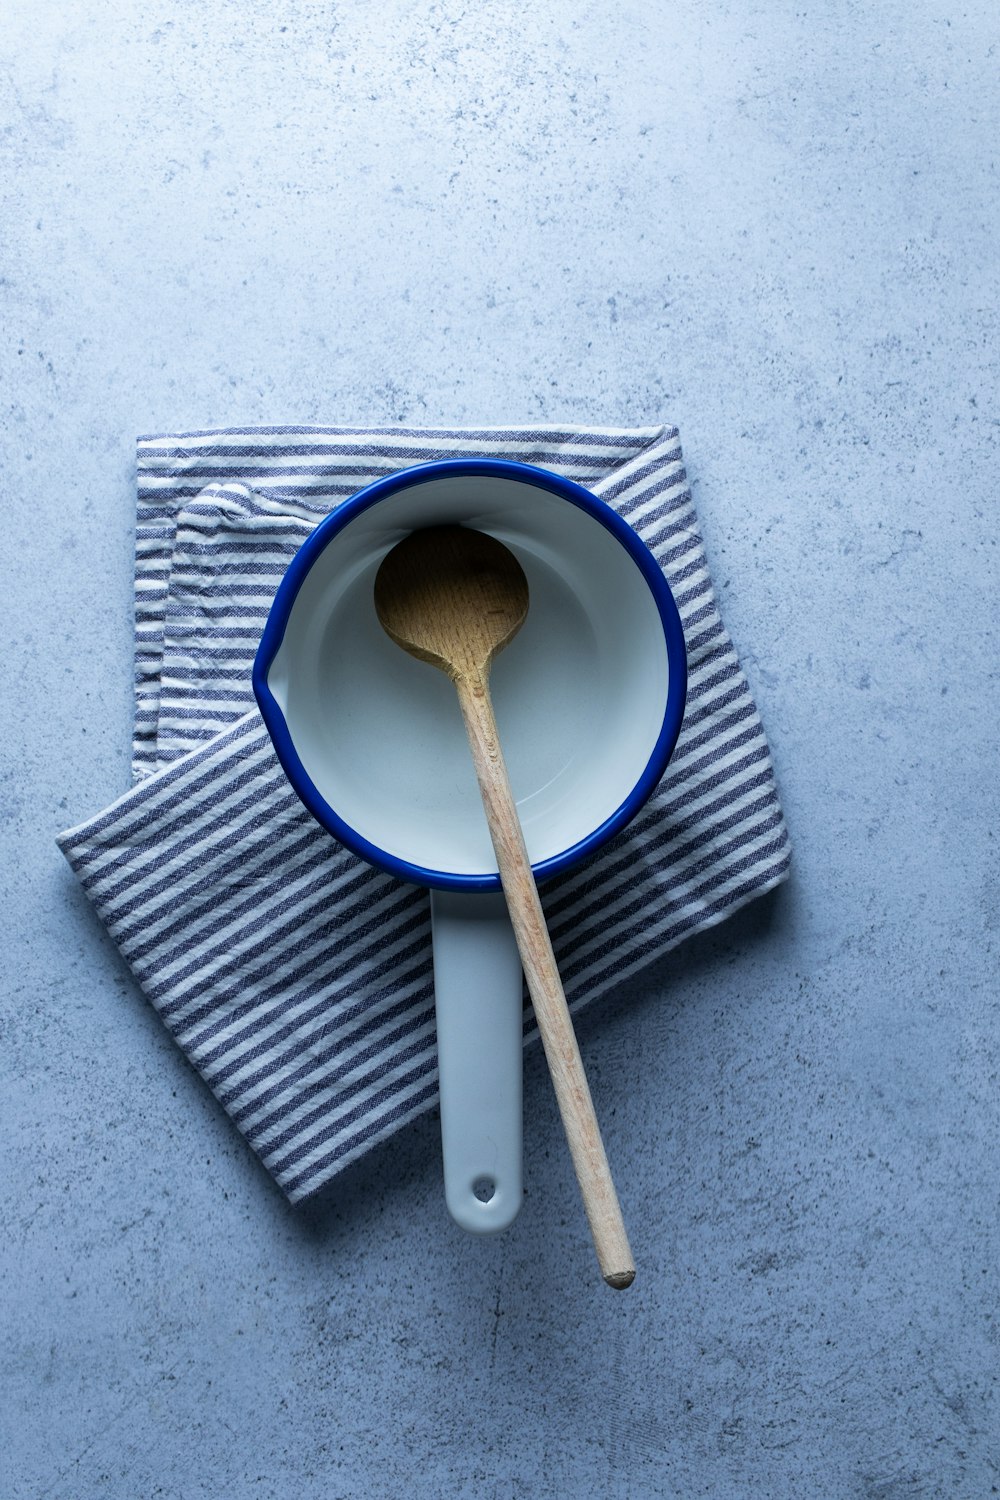 brown wooden spoon on white and blue ceramic plate